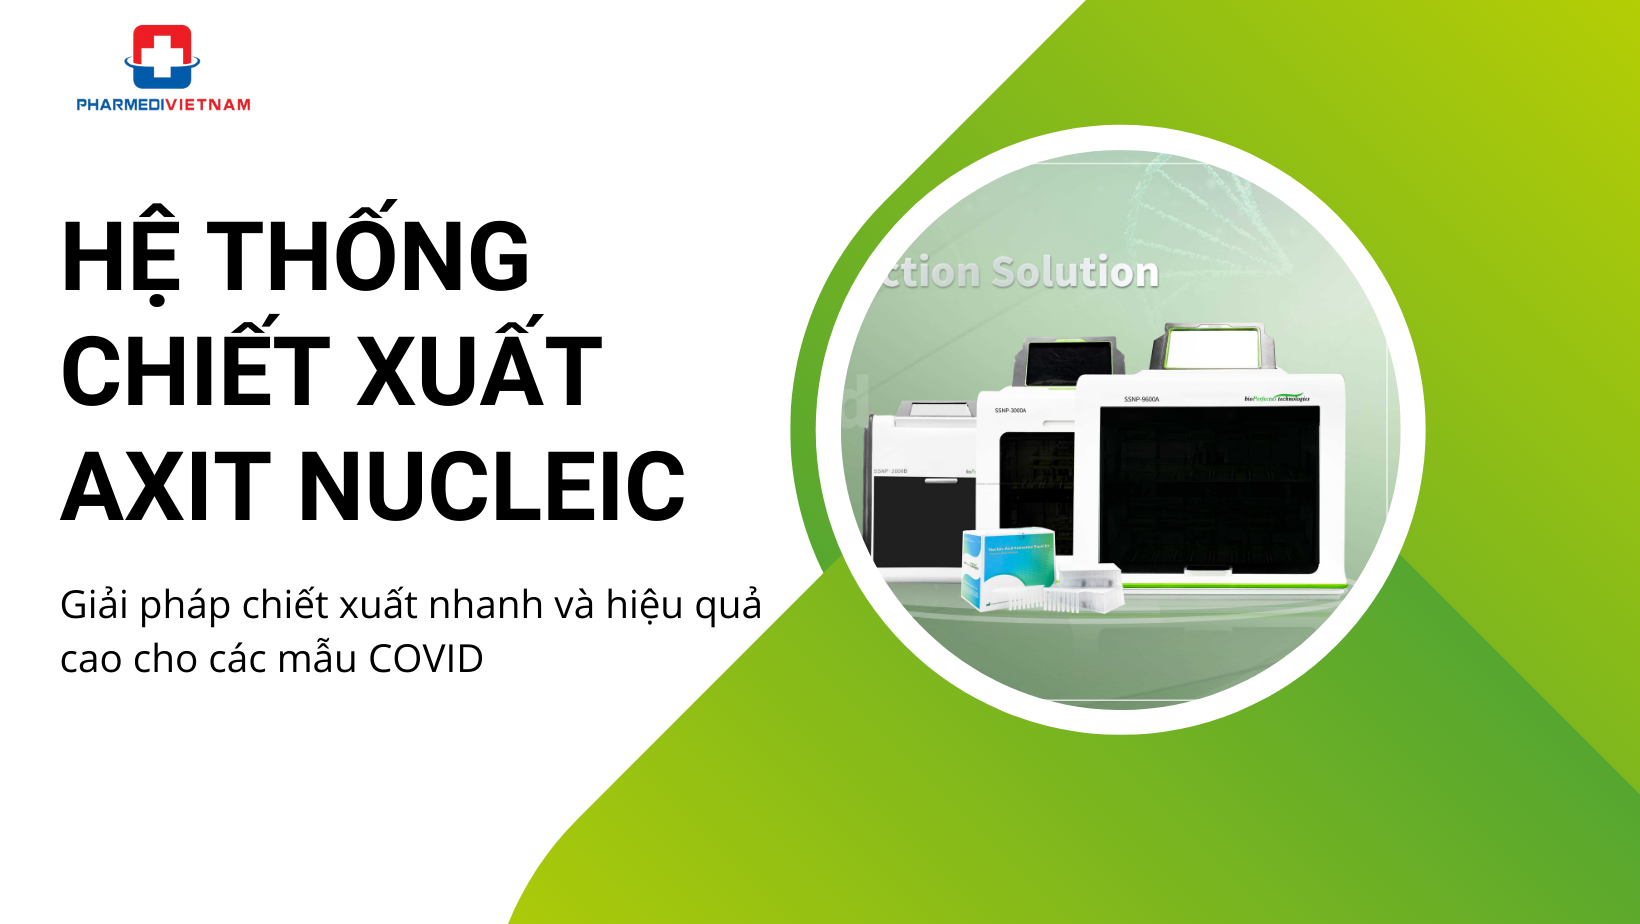 Hệ thống chiết xuất axit nucleic